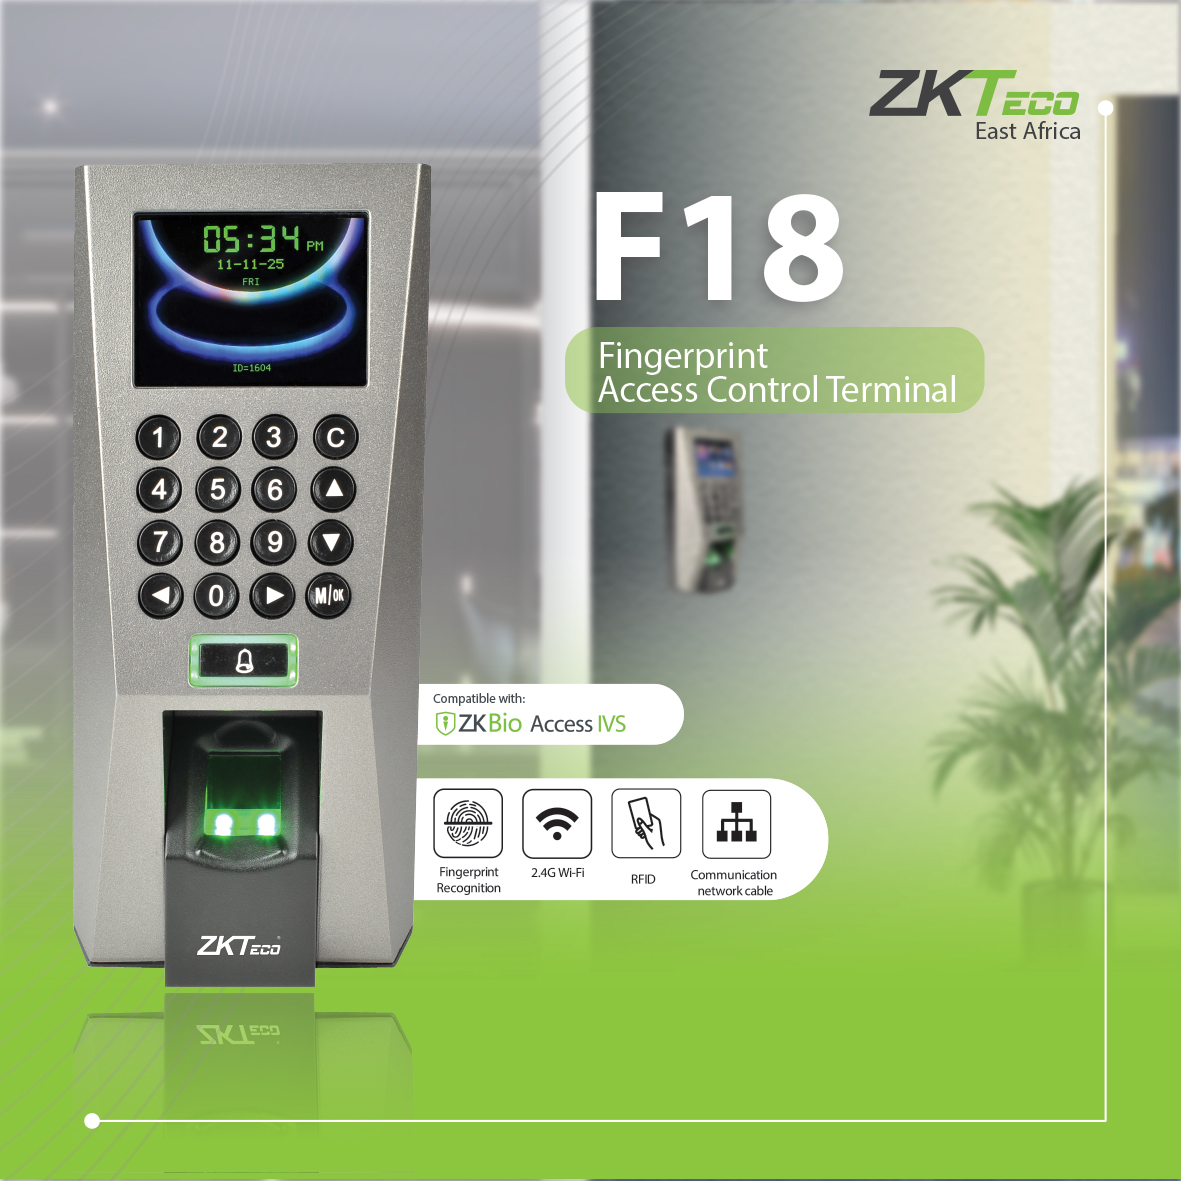 Introducing the ZKTeco F18 access control Terminal!

Manage Your Access Control and Time Attendance better with the F18 Device! Learn More: zkteco-ea.com/f18-zkteco/

 #ZKTeco #f18 #f18zkteco #Biometrics #AccessControl #TimeAttendance #timeattendancesystem #biometricsecurity